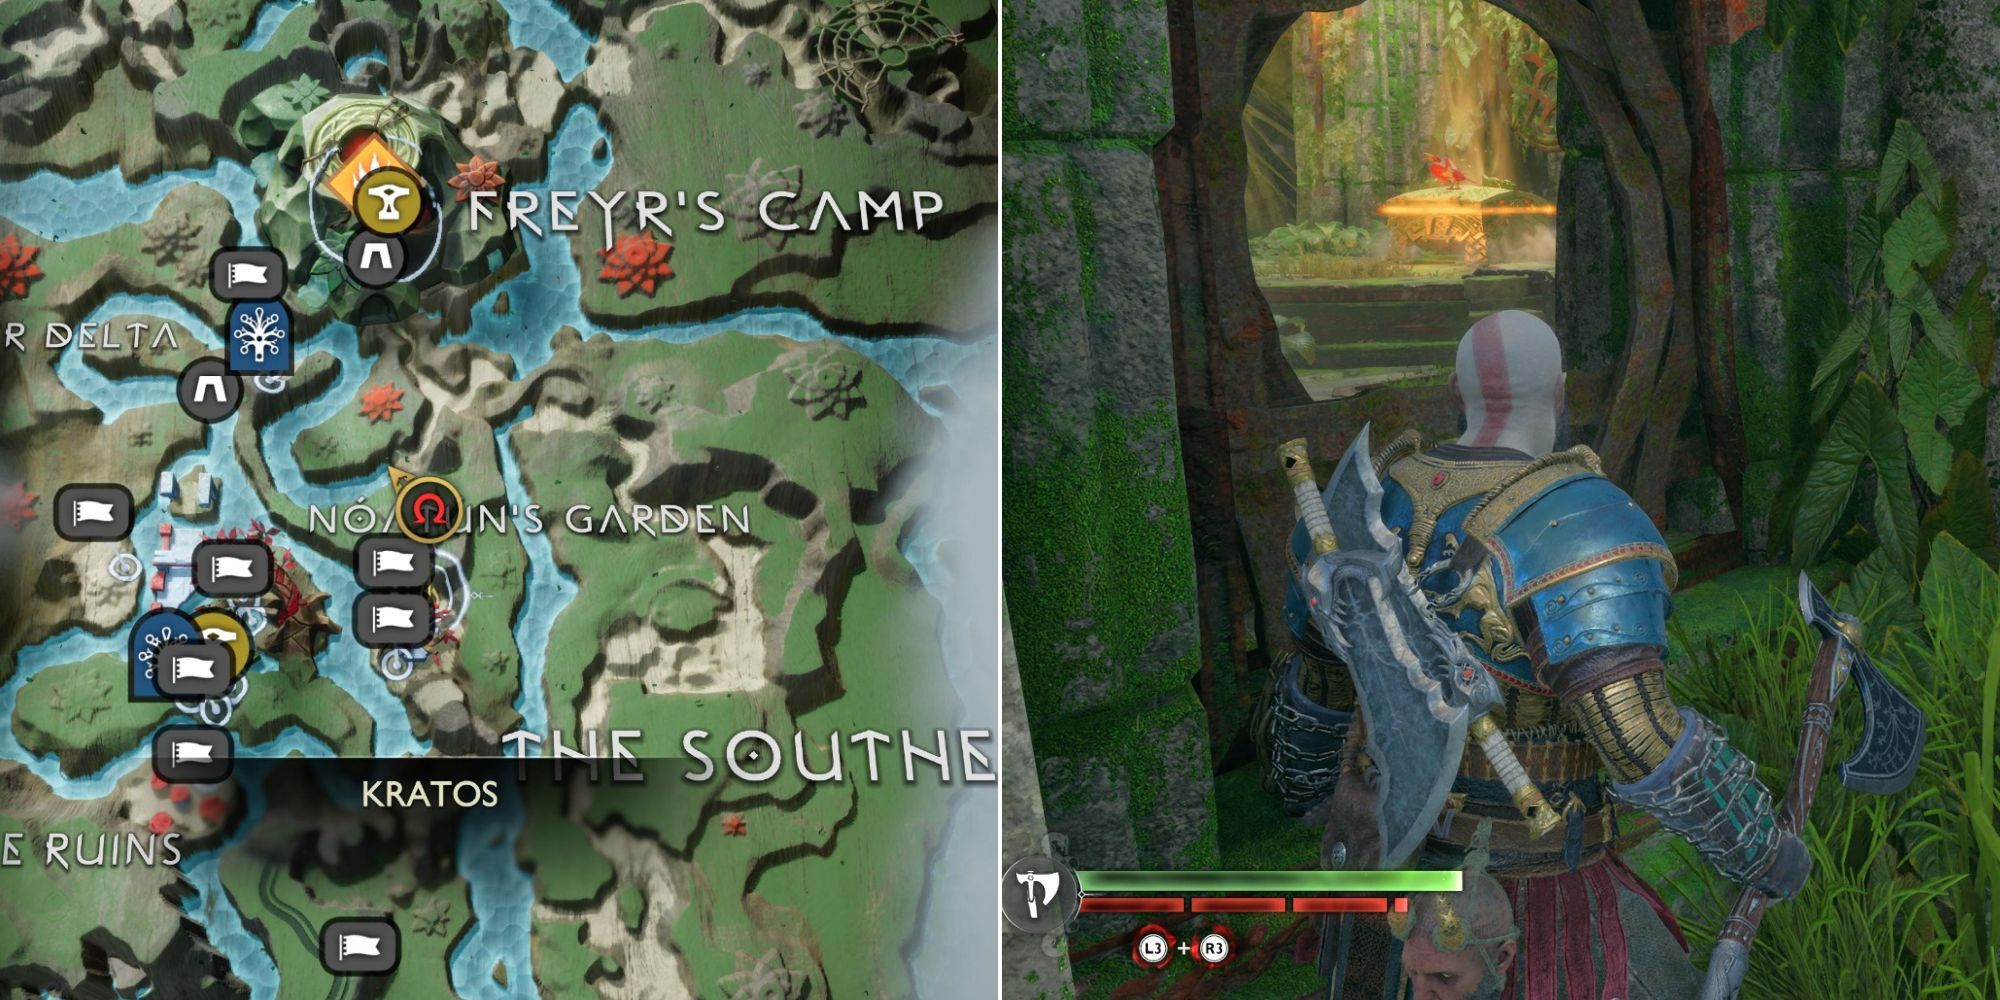 Two photos. The left is the Vanaheim map showing the location of the garden chest, The right photo is Kratos trying to sneak a quick look into the locked off room.